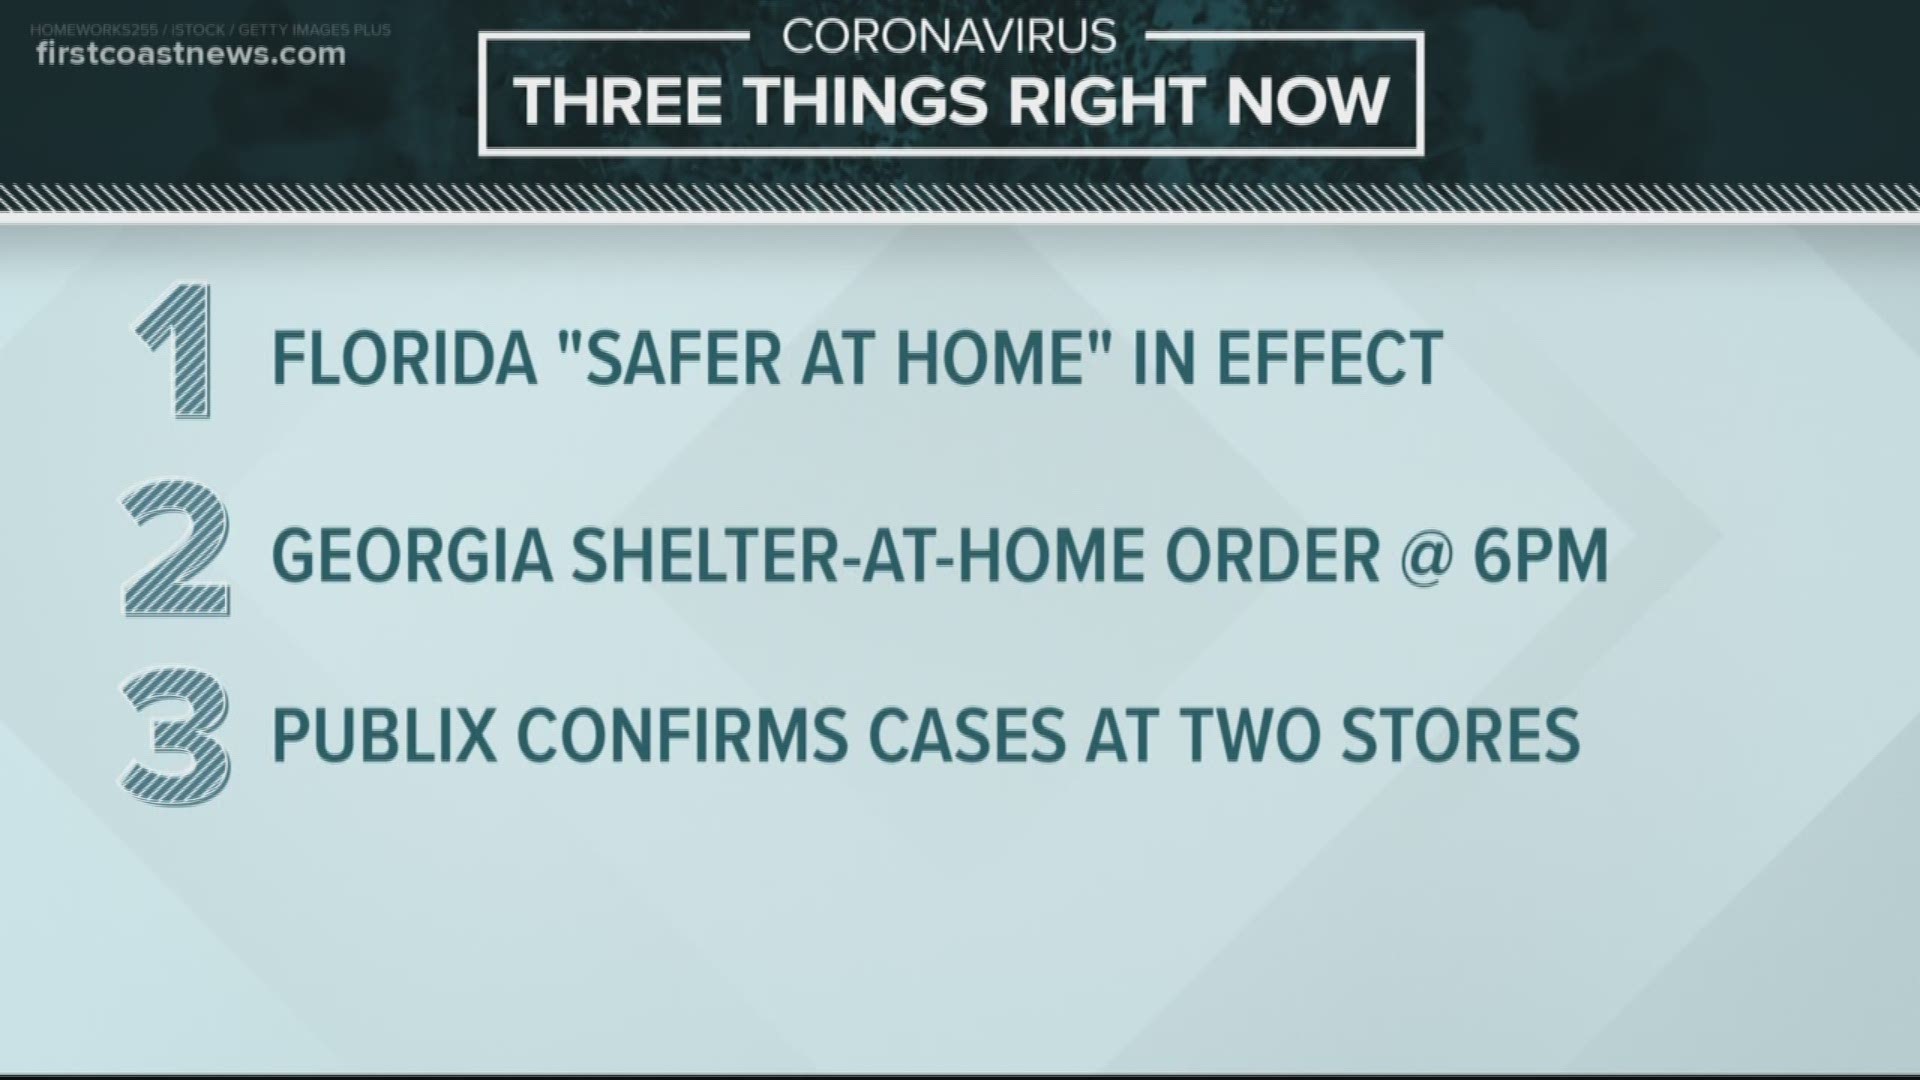 Florida's safer-at-home order is in effect and Georgia will also see changes starting tonight.